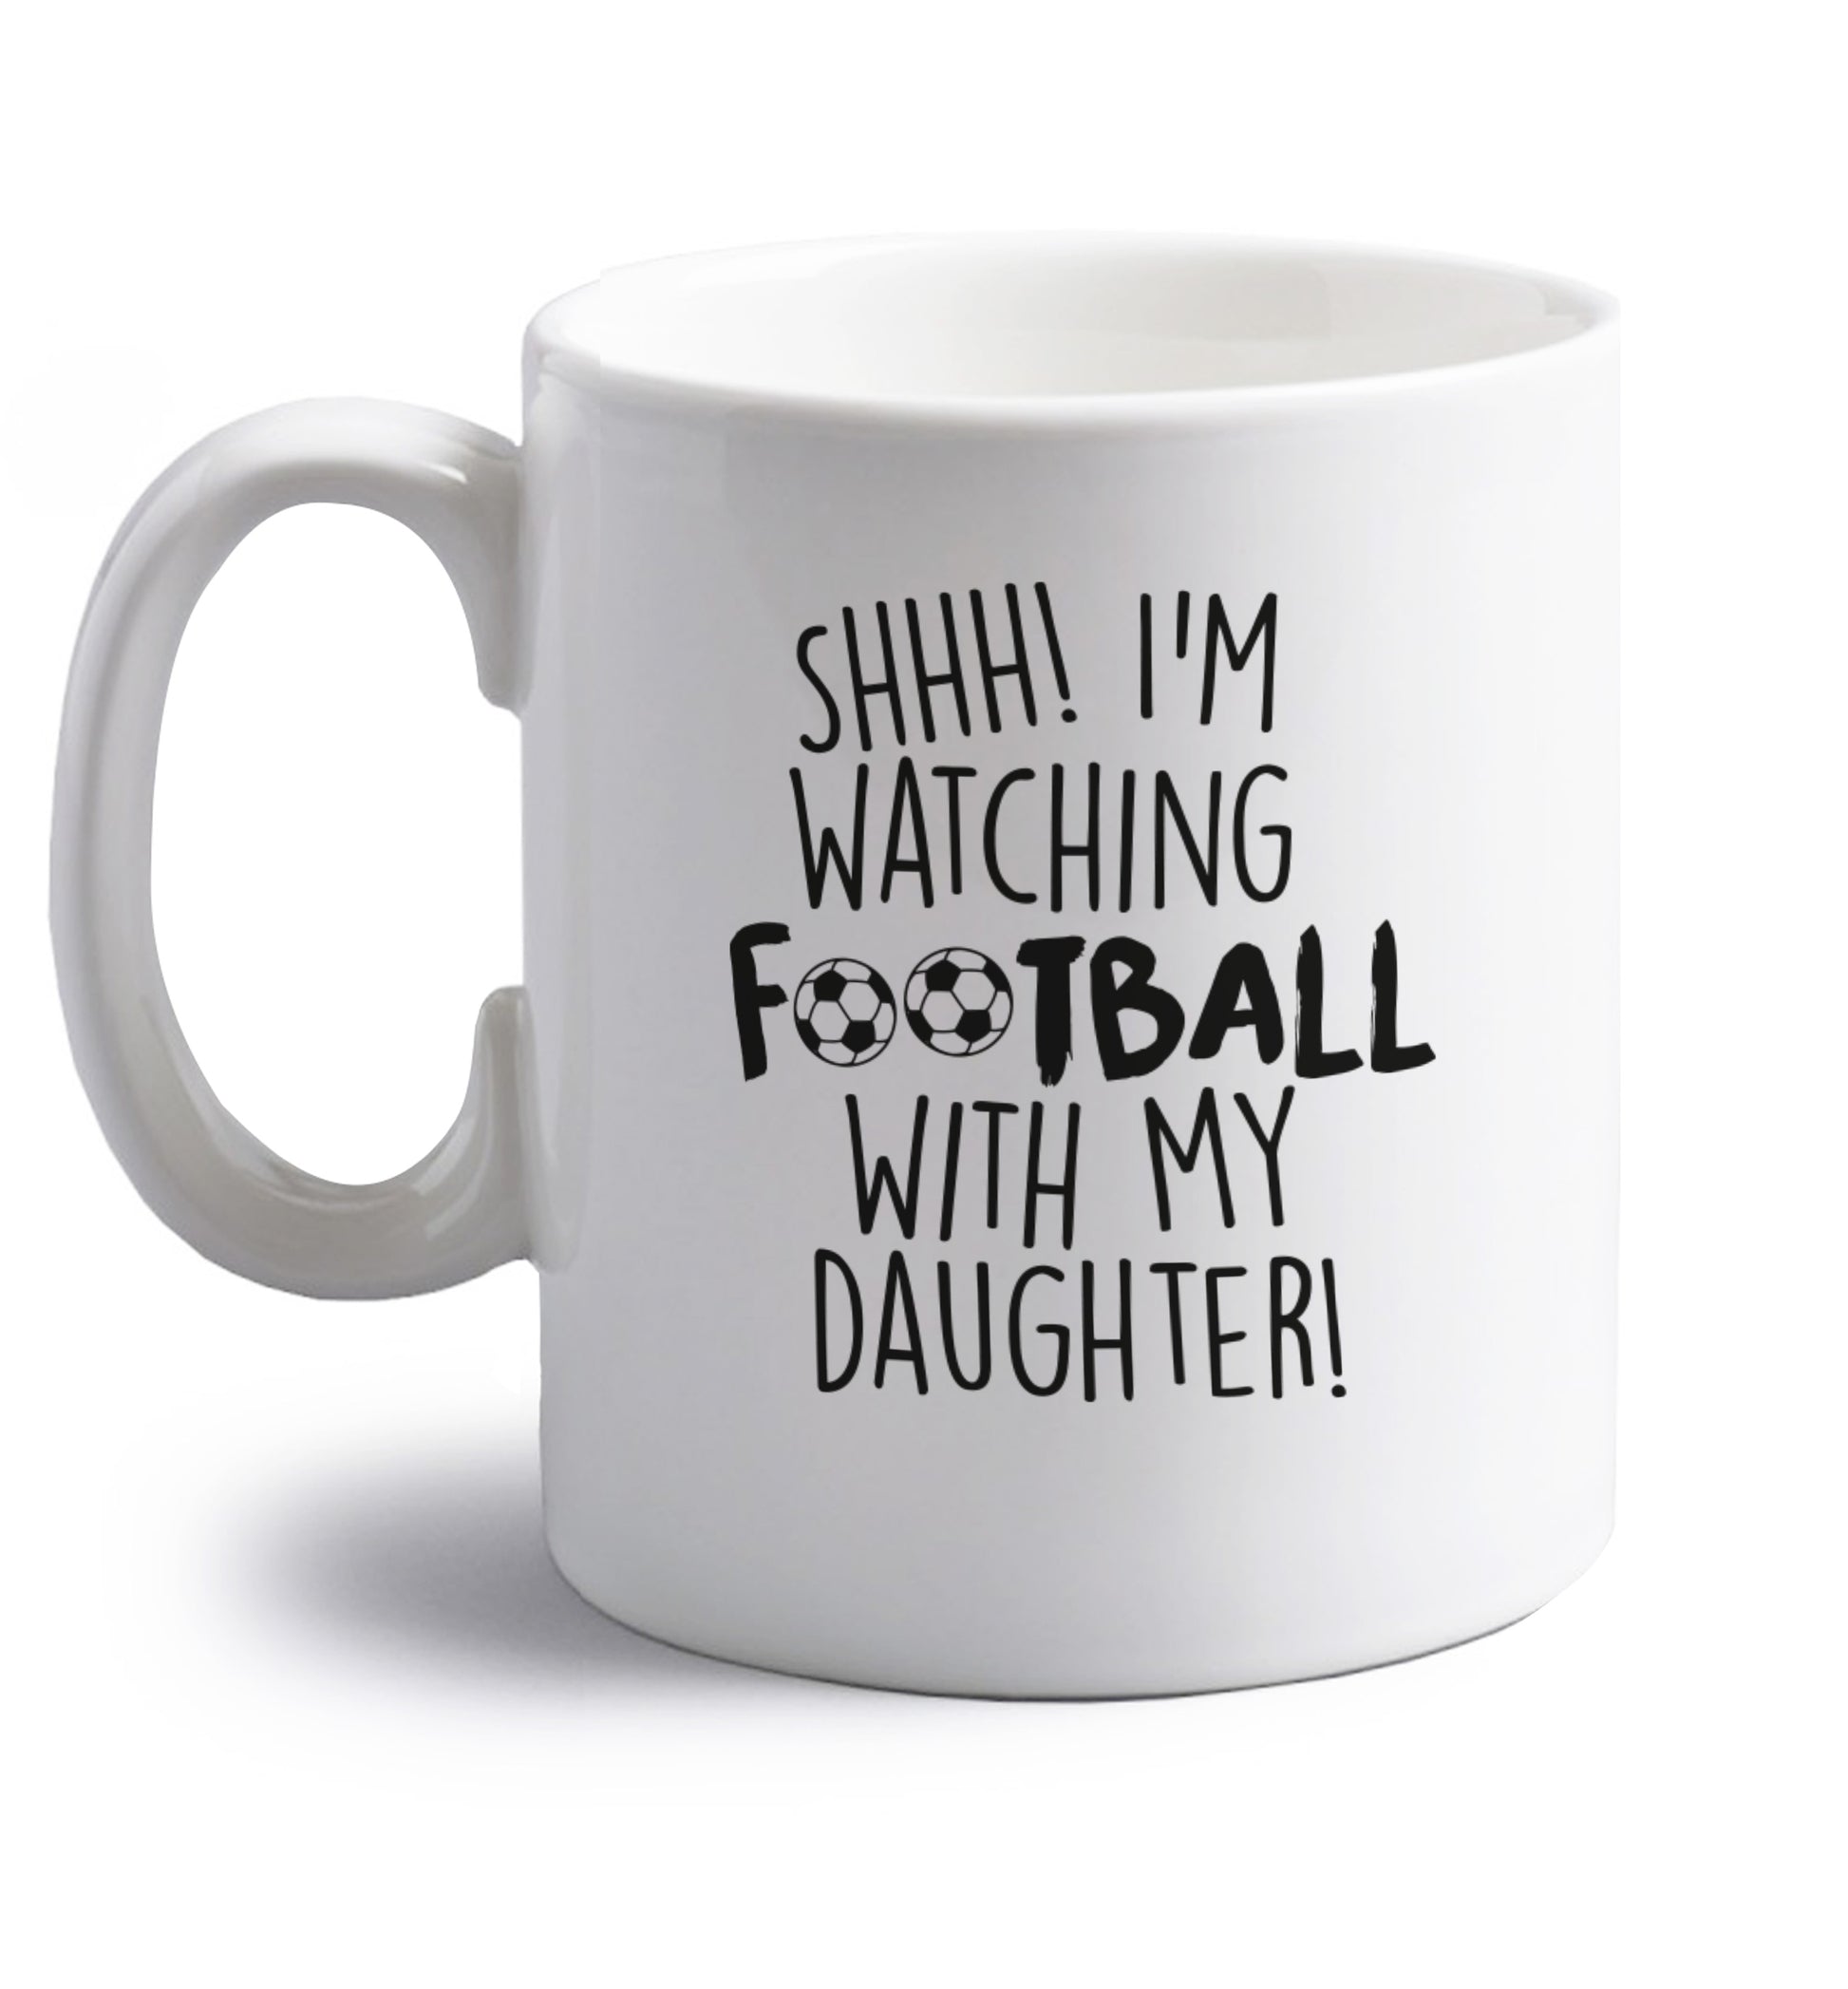 Shhh I'm watching football with my daughter right handed white ceramic mug 